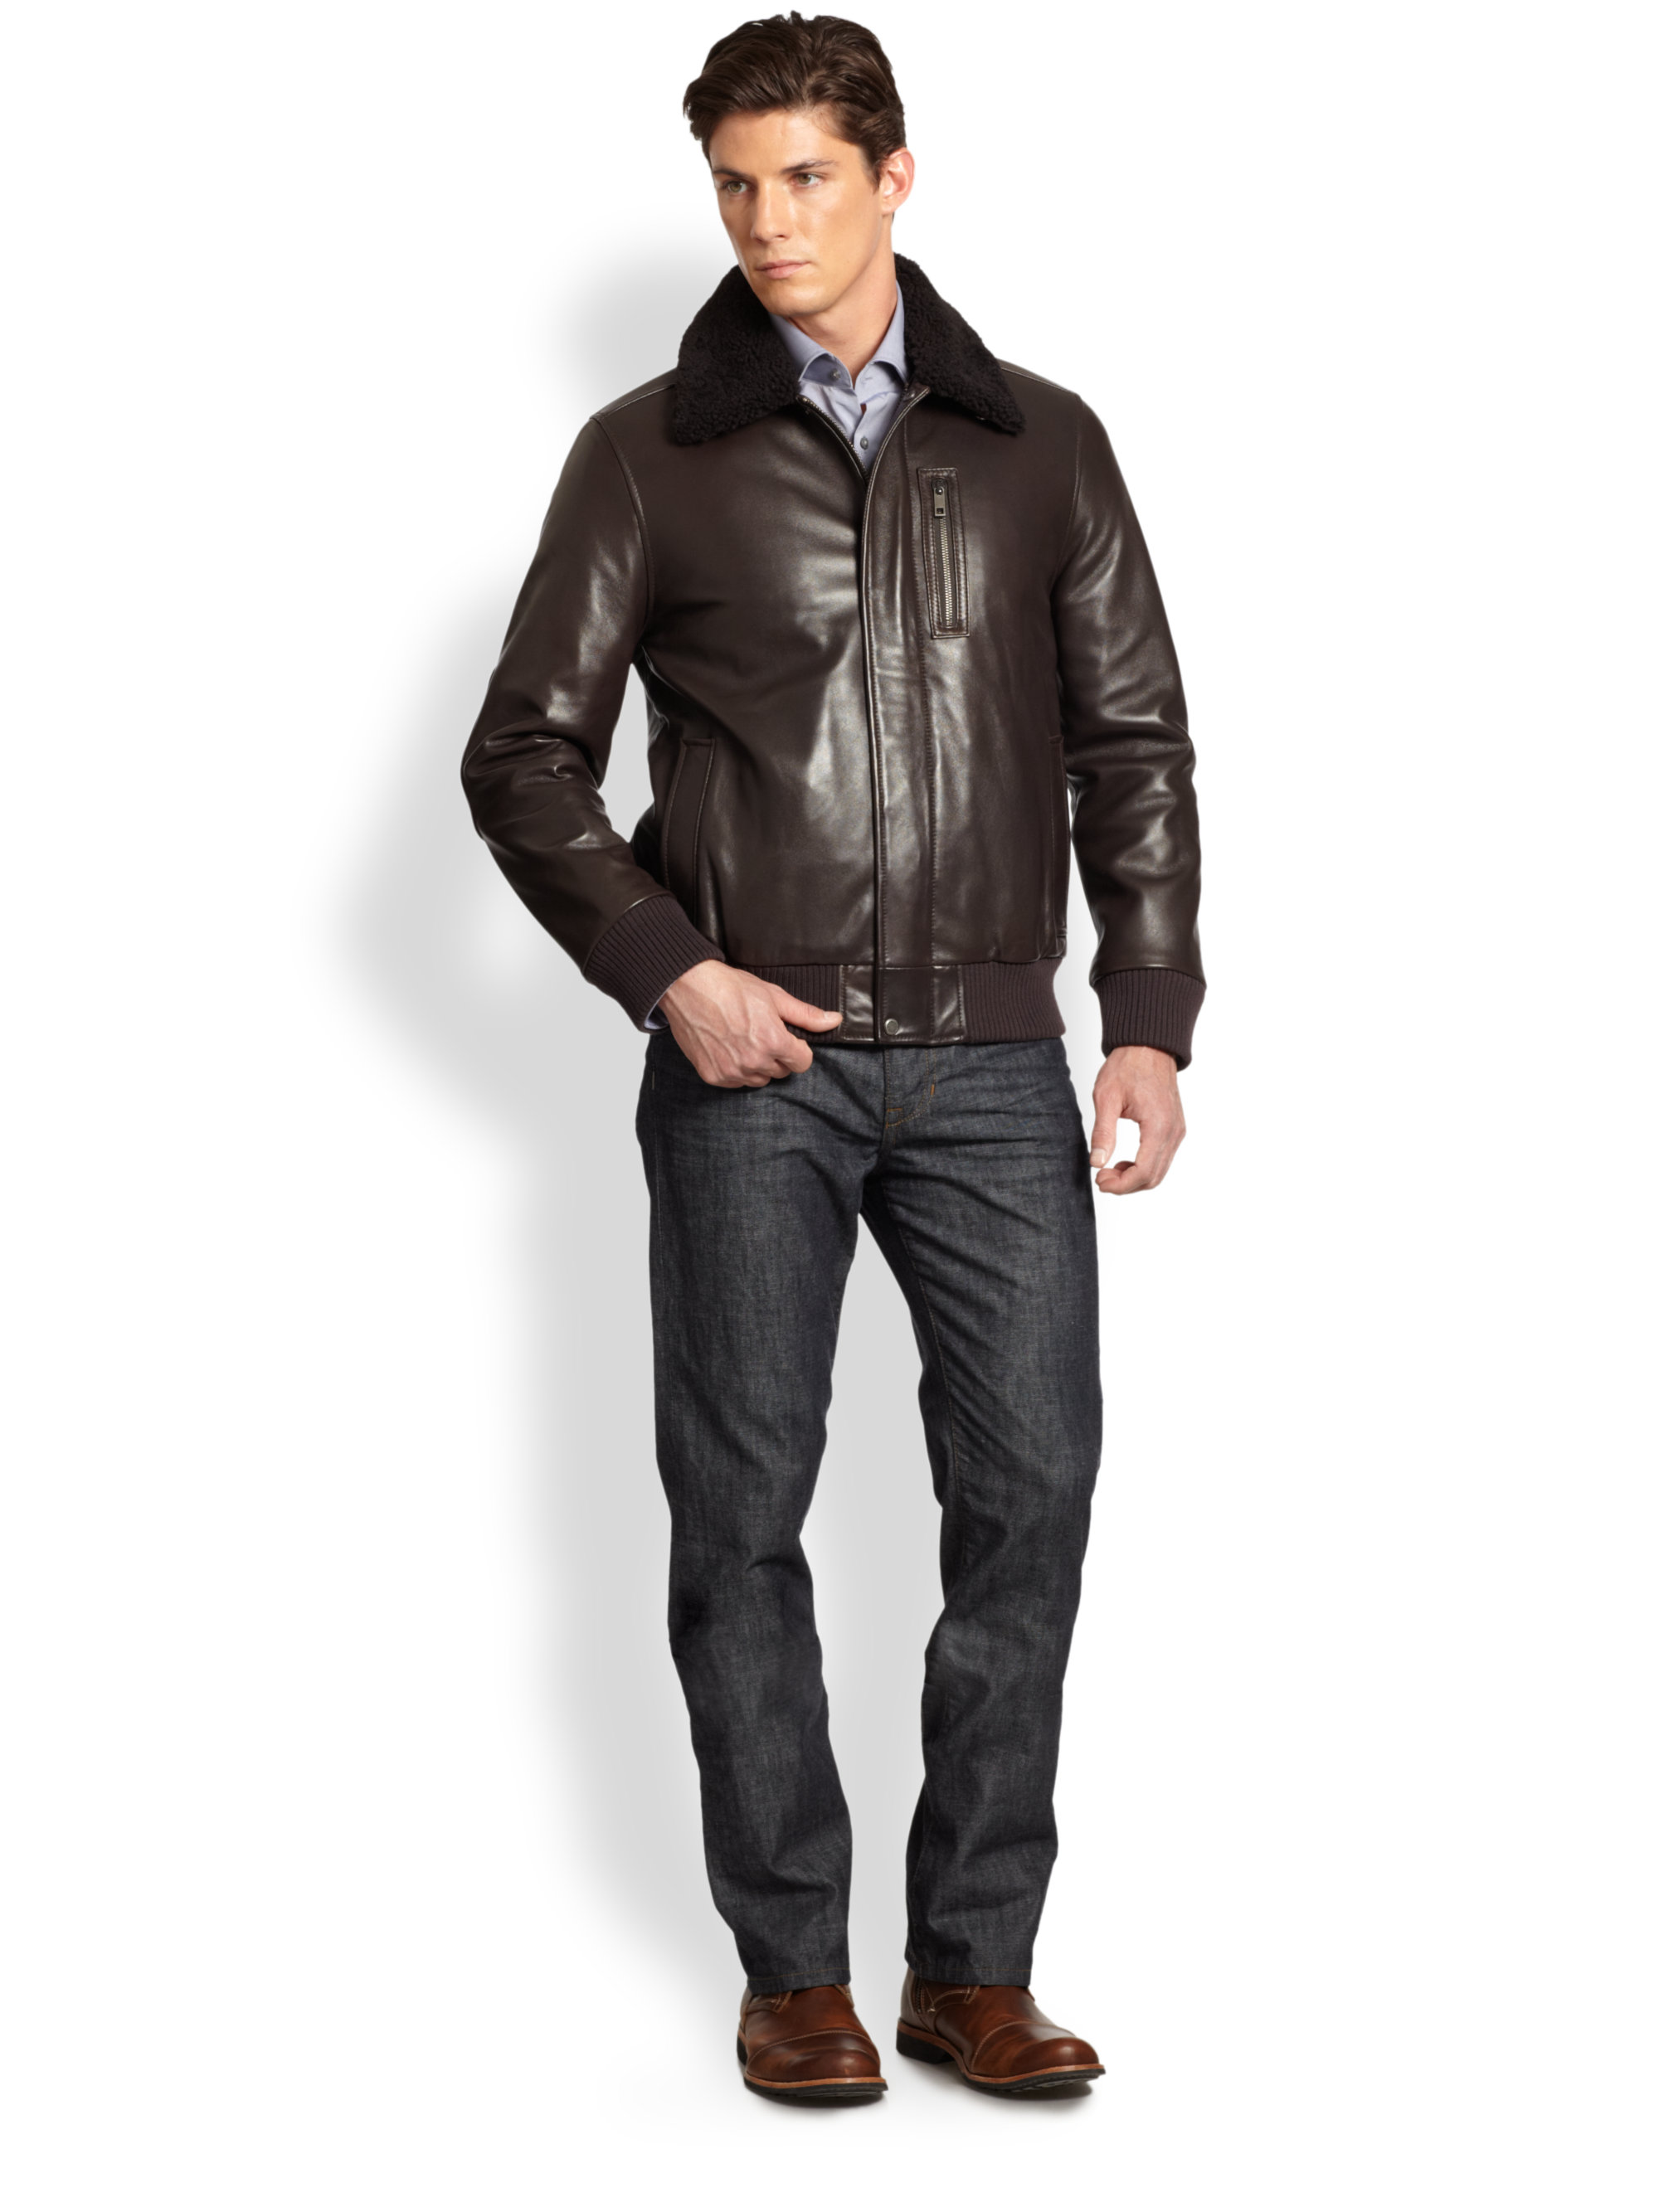 Lyst - Andrew Marc Shearling Leather Bomber Jacket in Brown for Men